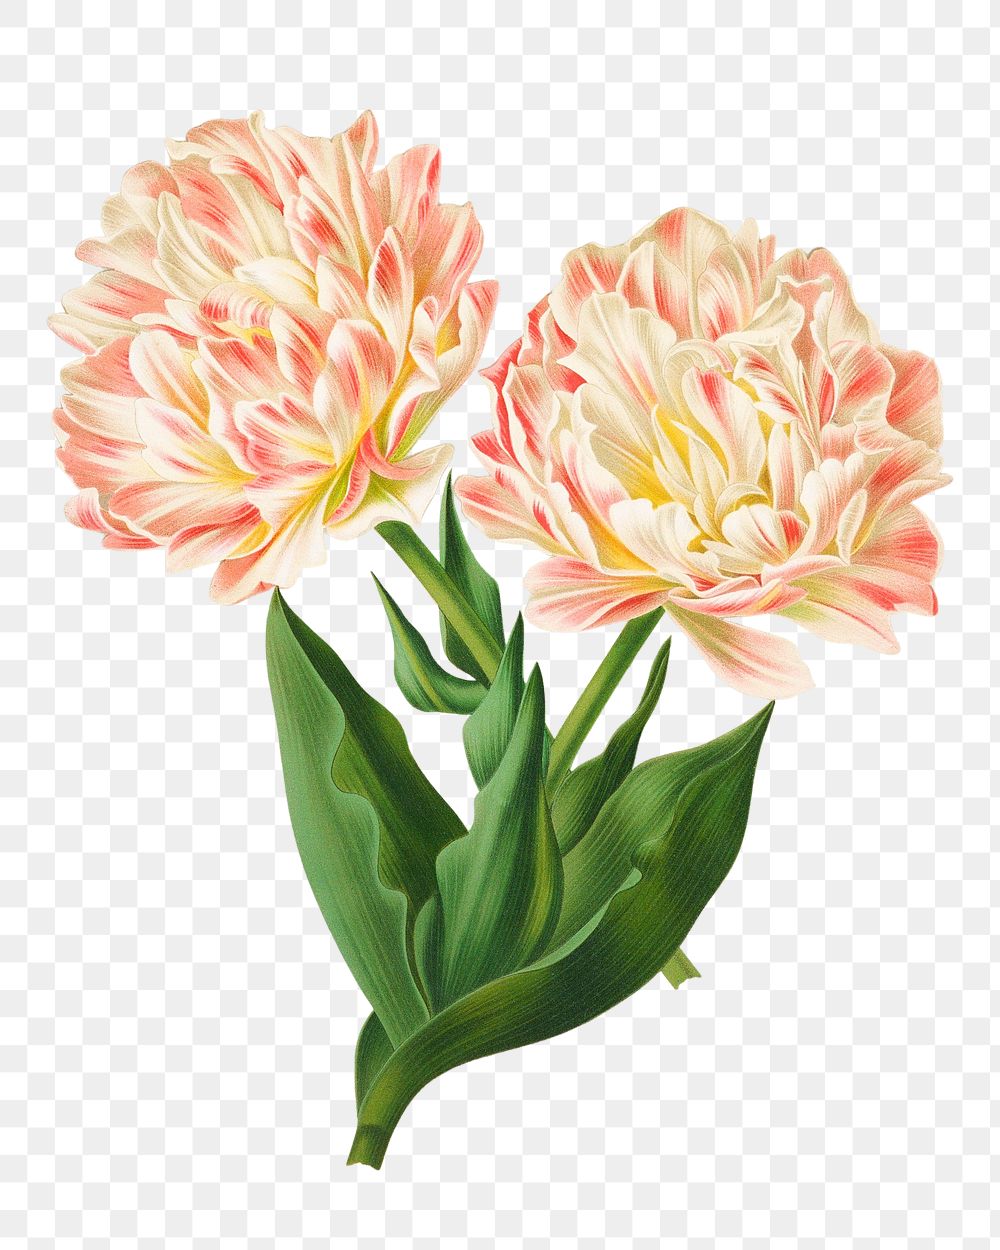 PNG Double tulips, vintage flower illustration by Arentine H. Arendsen, transparent background. Remixed by rawpixel.